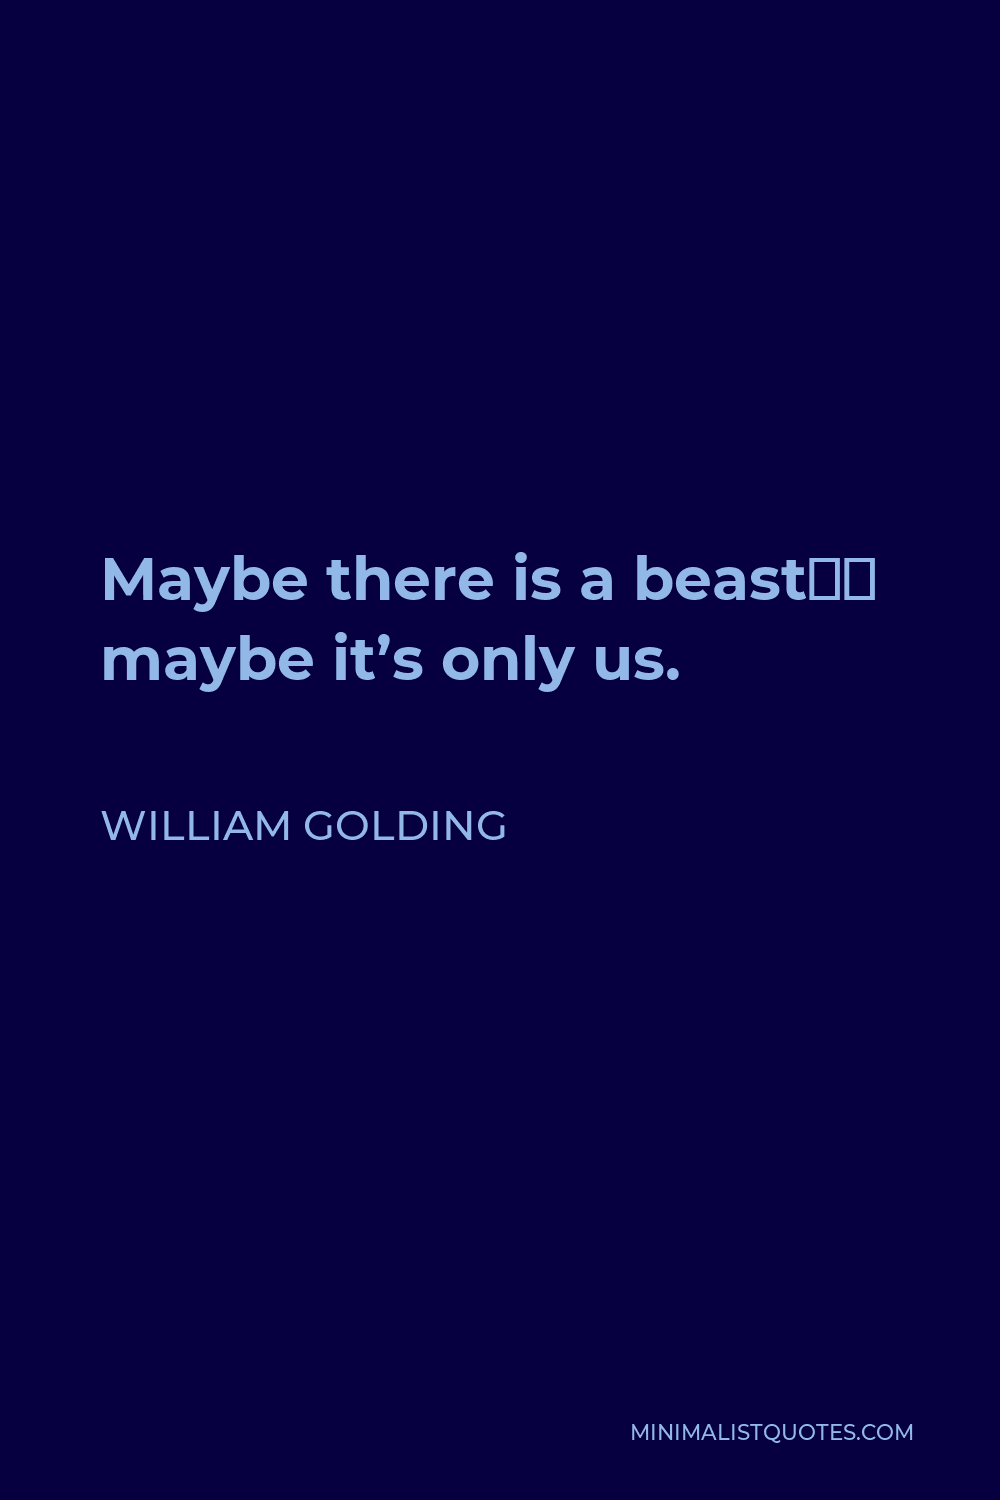 William Golding Quote - Maybe there is a beast… maybe it’s only us.